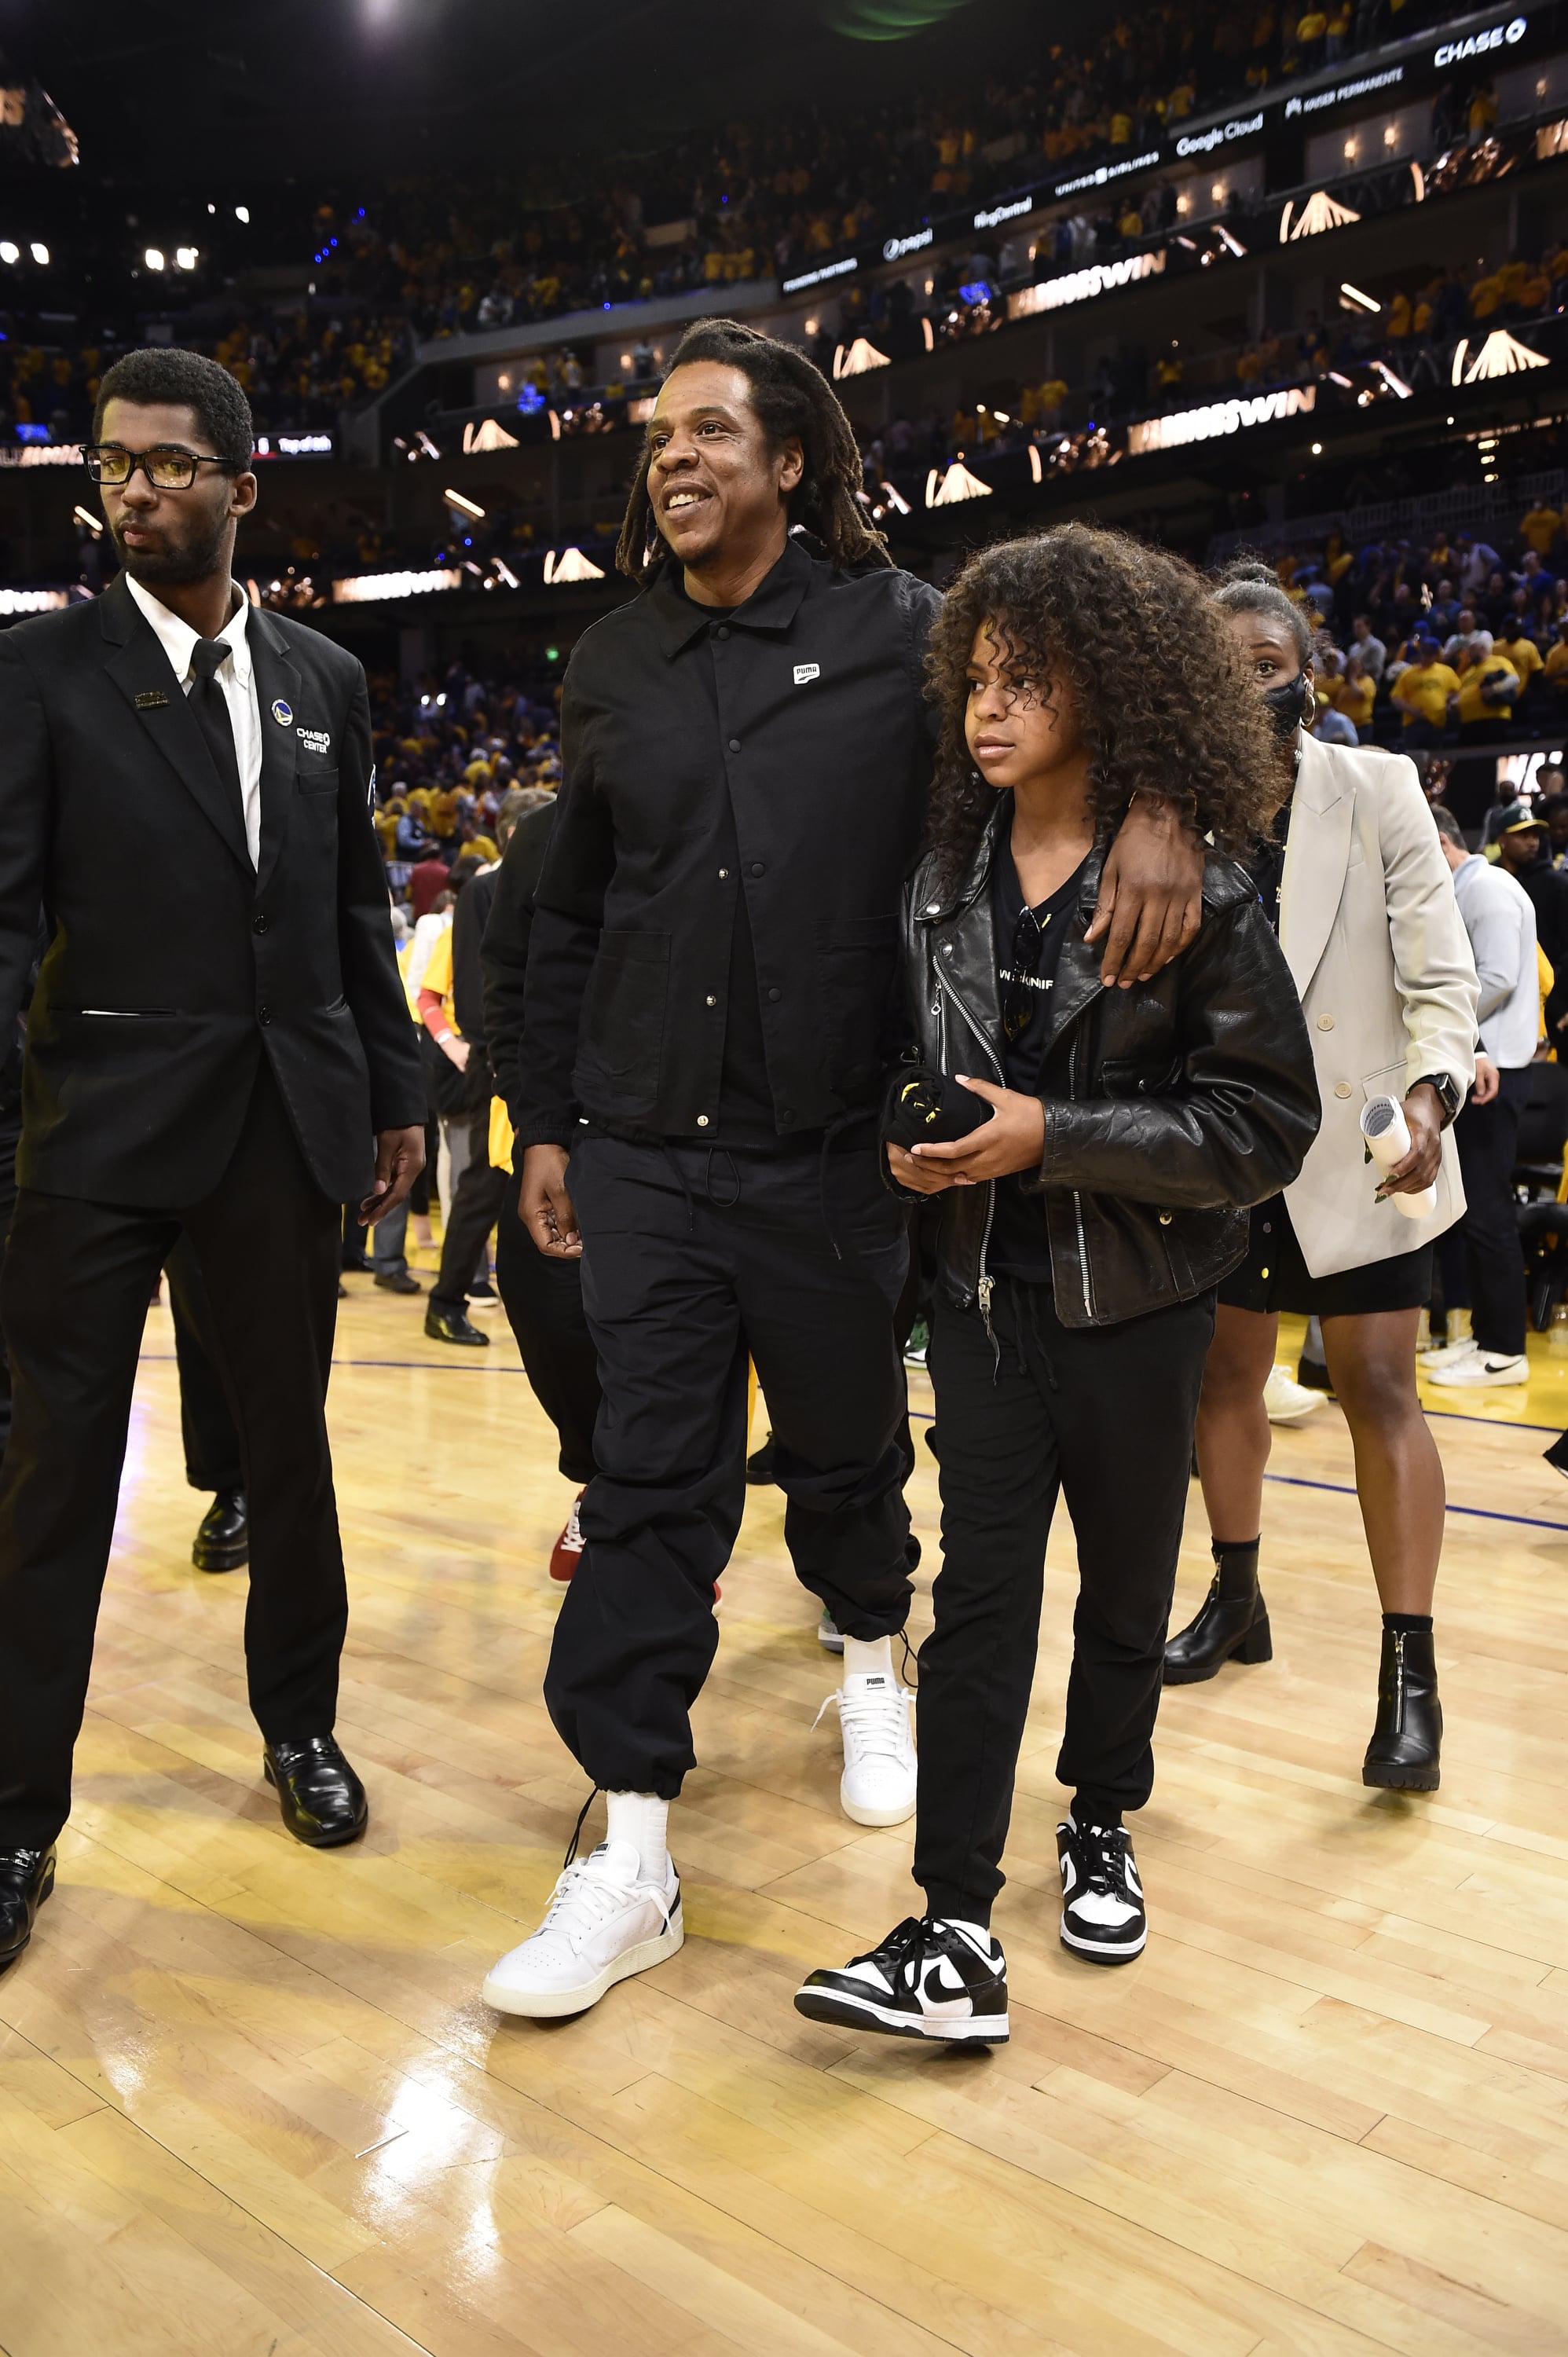 Blue Ivy's All-Black Outfit at the 2022 NBA Finals Game | POPSUGAR Fashion